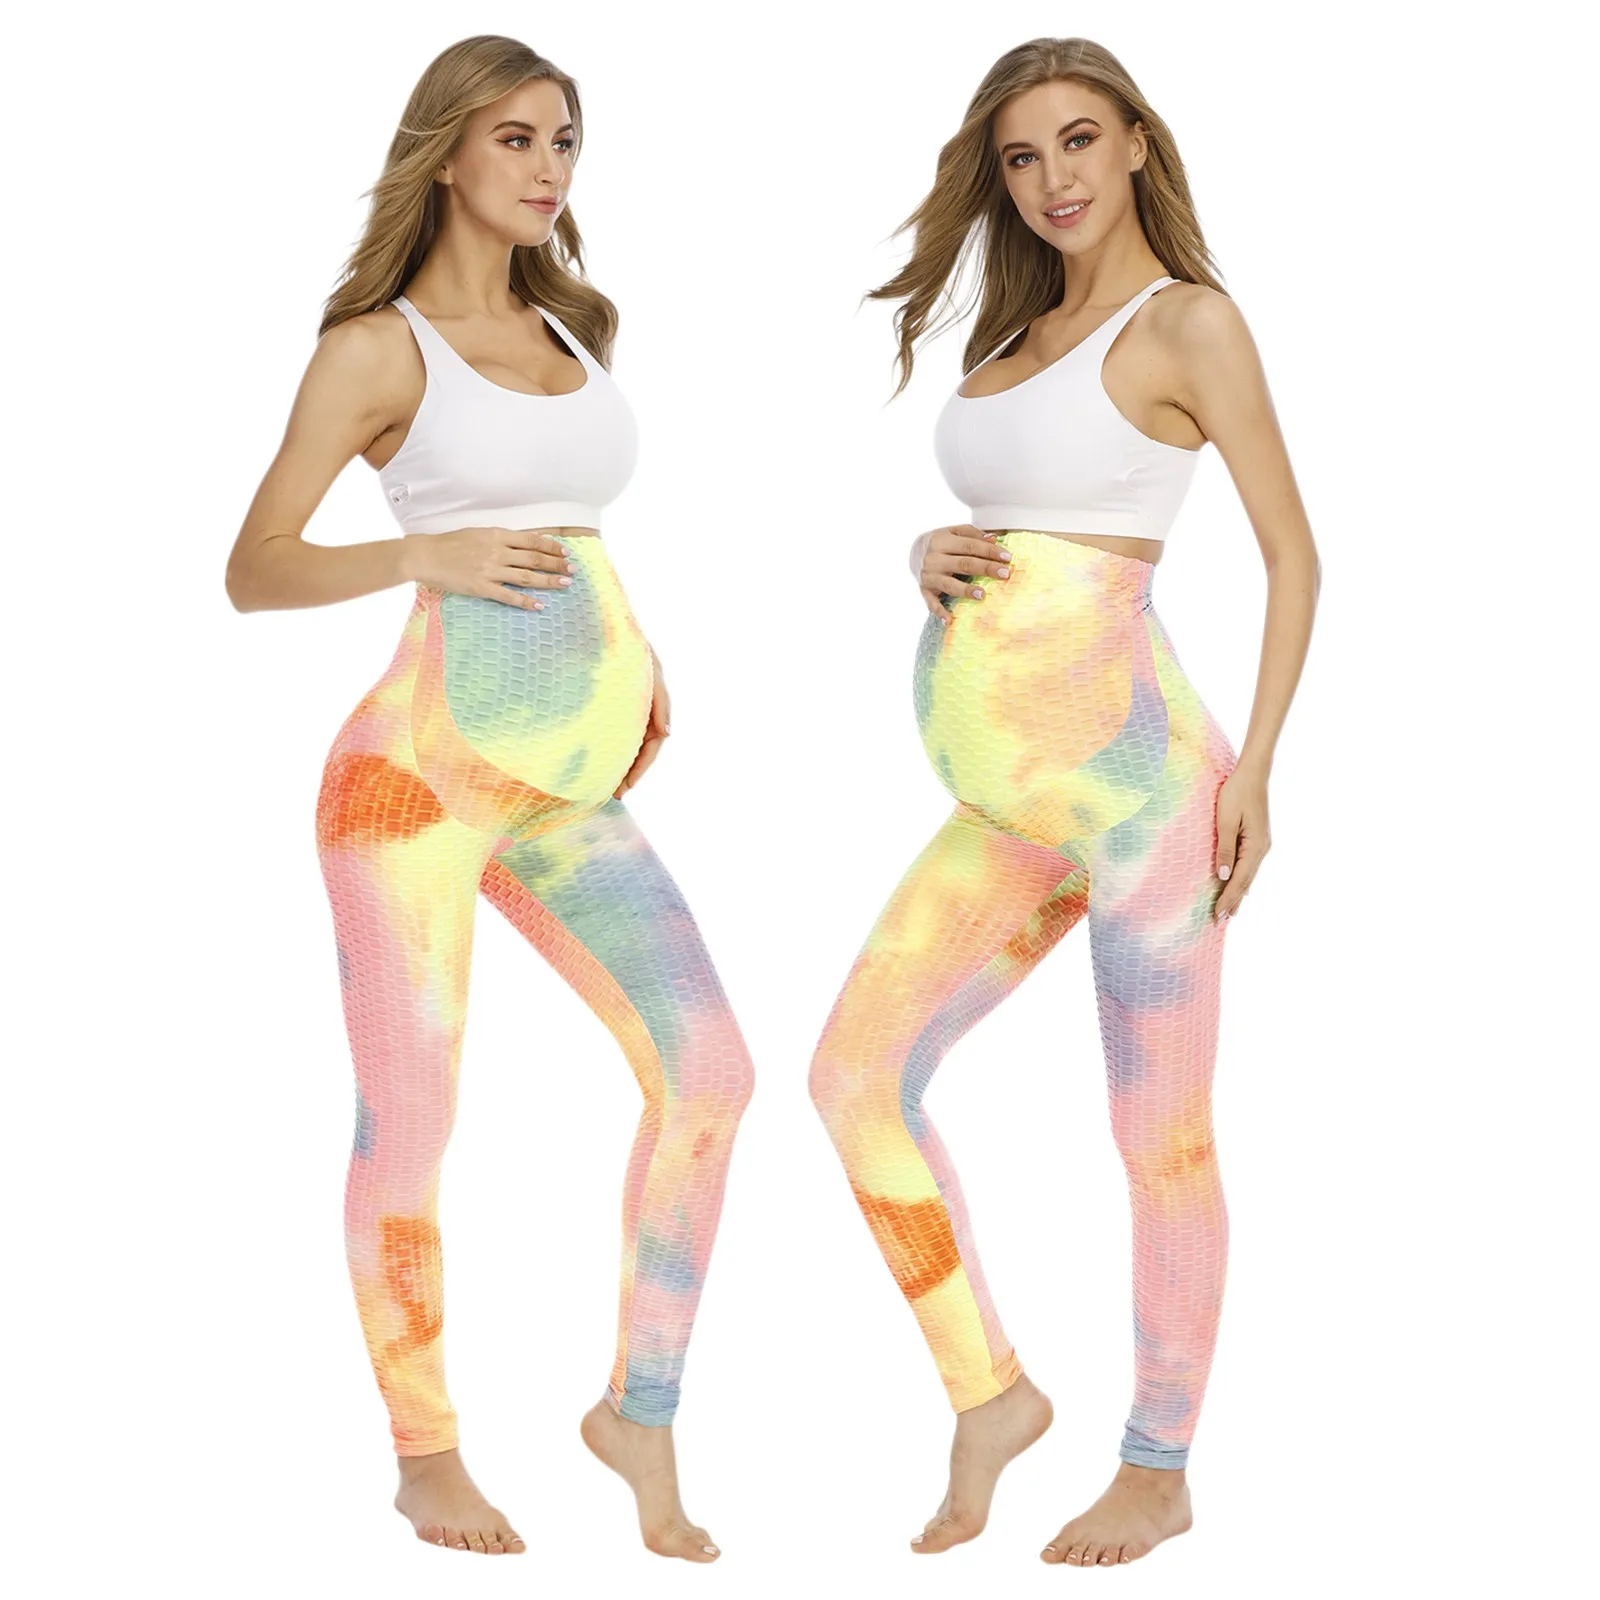 

New Pregnant Women Maternity Pregnancy Soft Pants Tie-dyed Stretch Athletic Workout Yoga Full Length Pant Leggings Clothes 2021